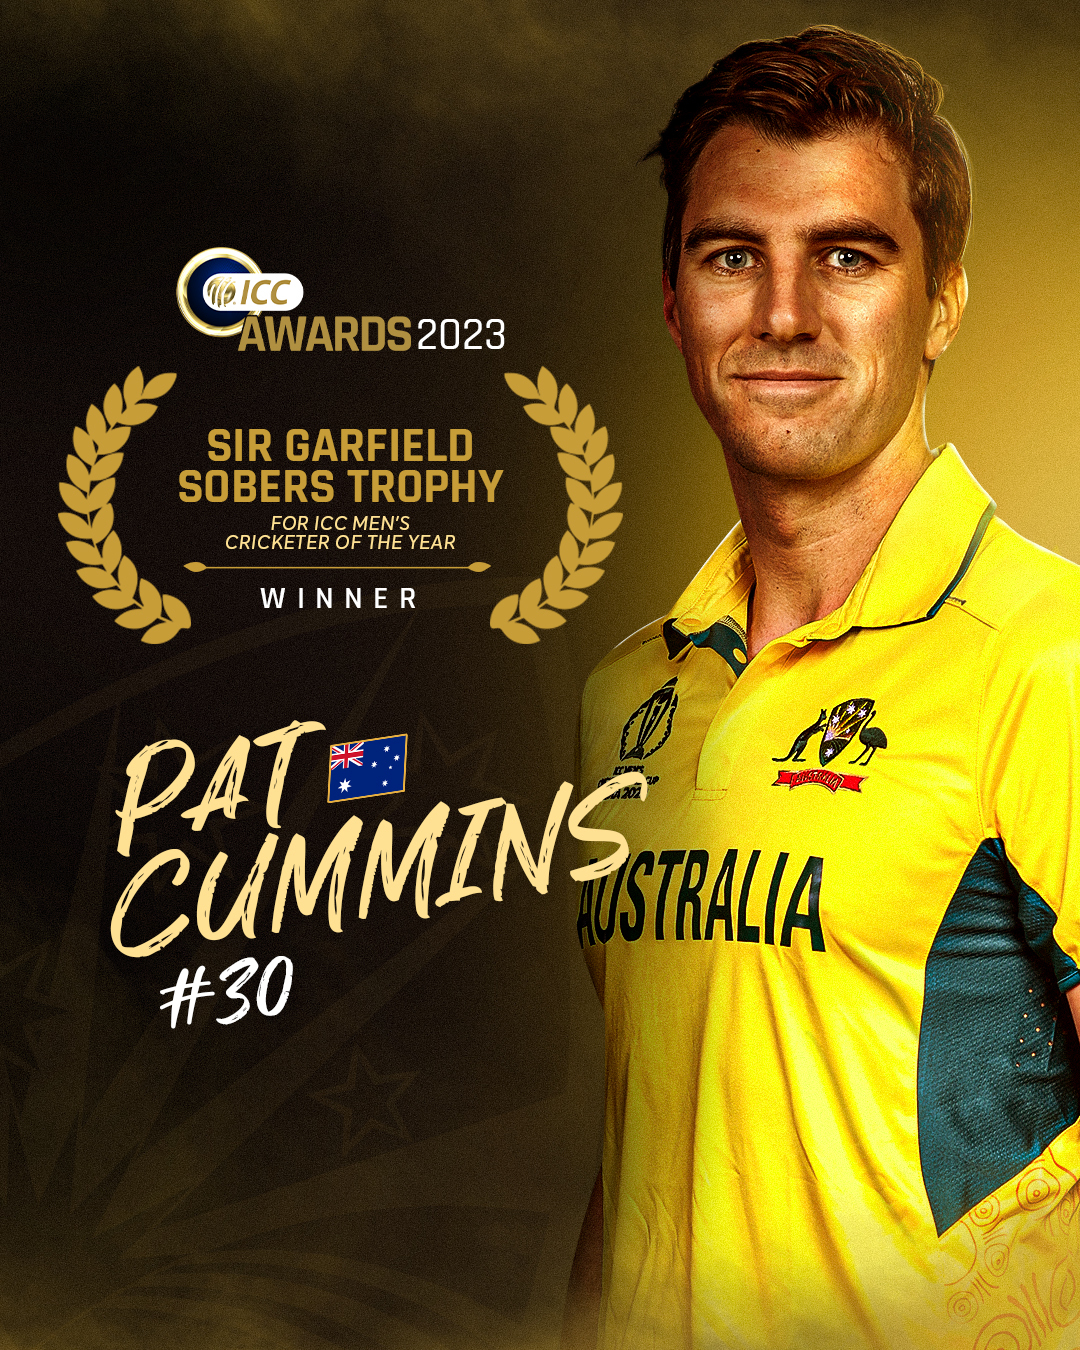 ICC on X: "A career-defining year for his country 🇦🇺 Pat Cummins is the ICC  Men's Cricketer of the Year for 2023 🏆